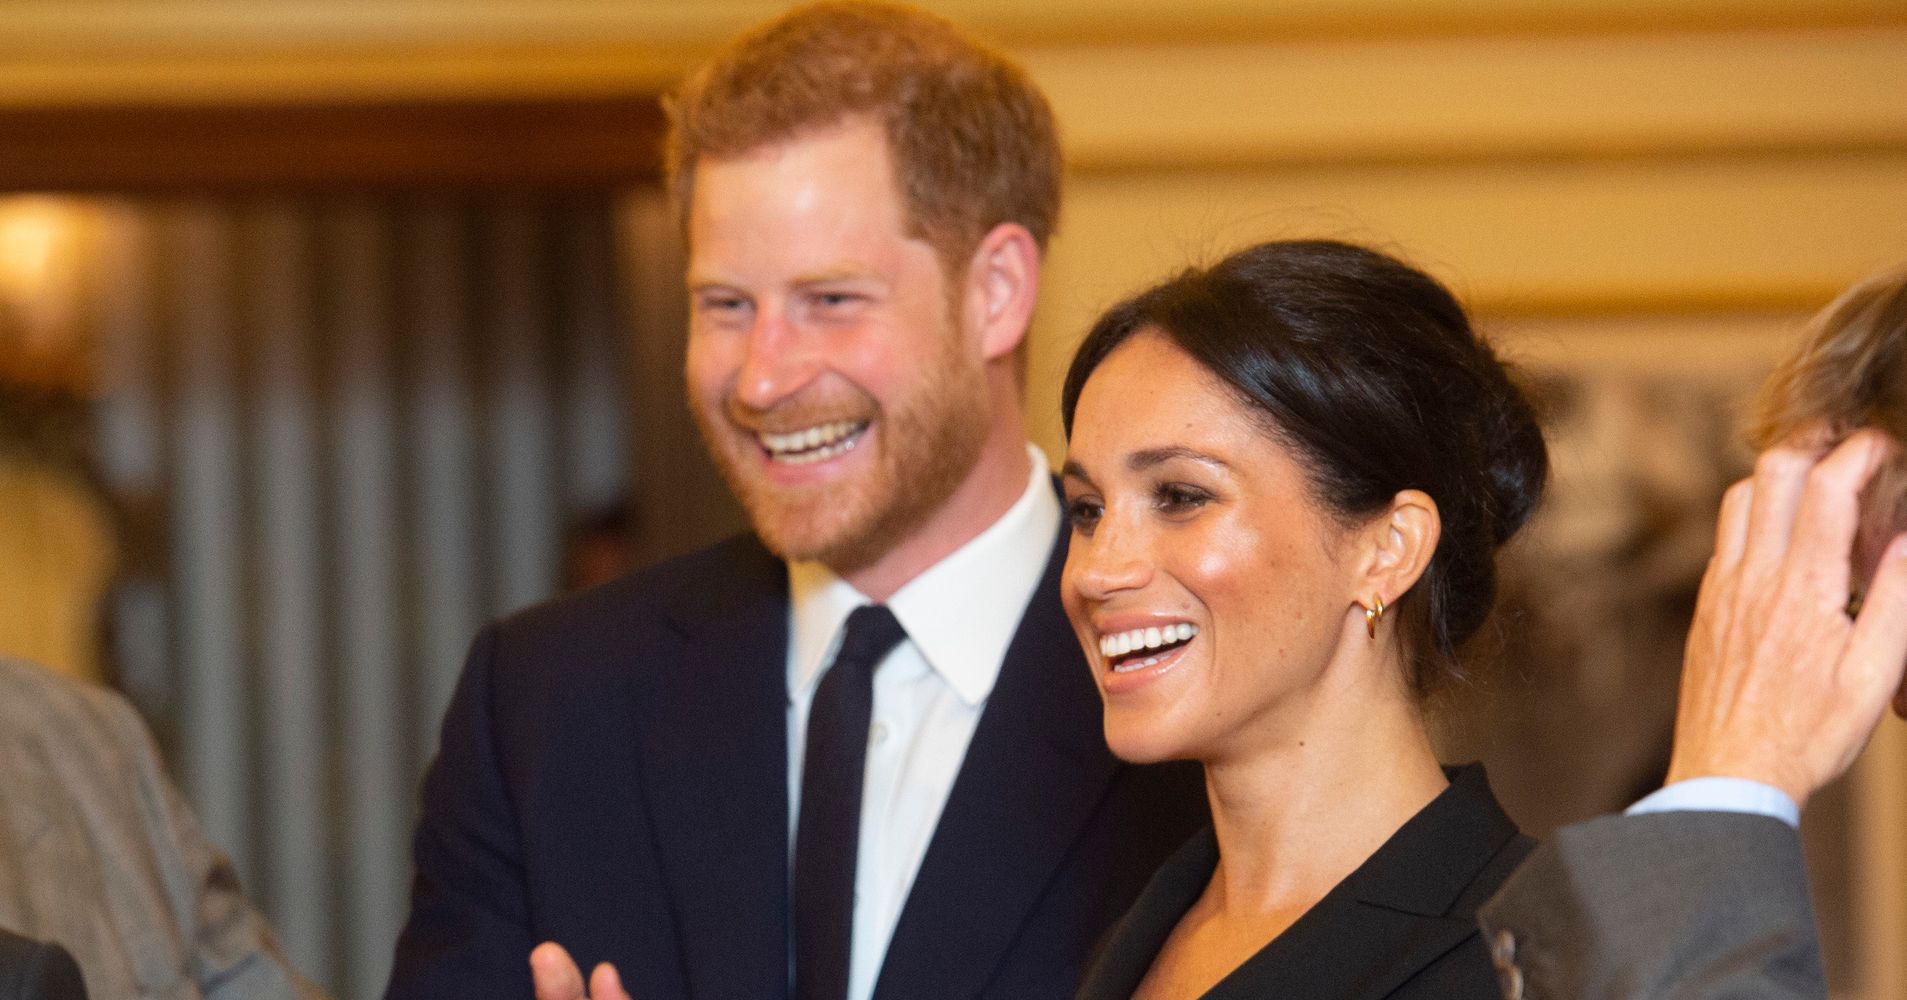 Meghan Markle And Prince Harry Just Attended 'Hamilton' For A Very ...